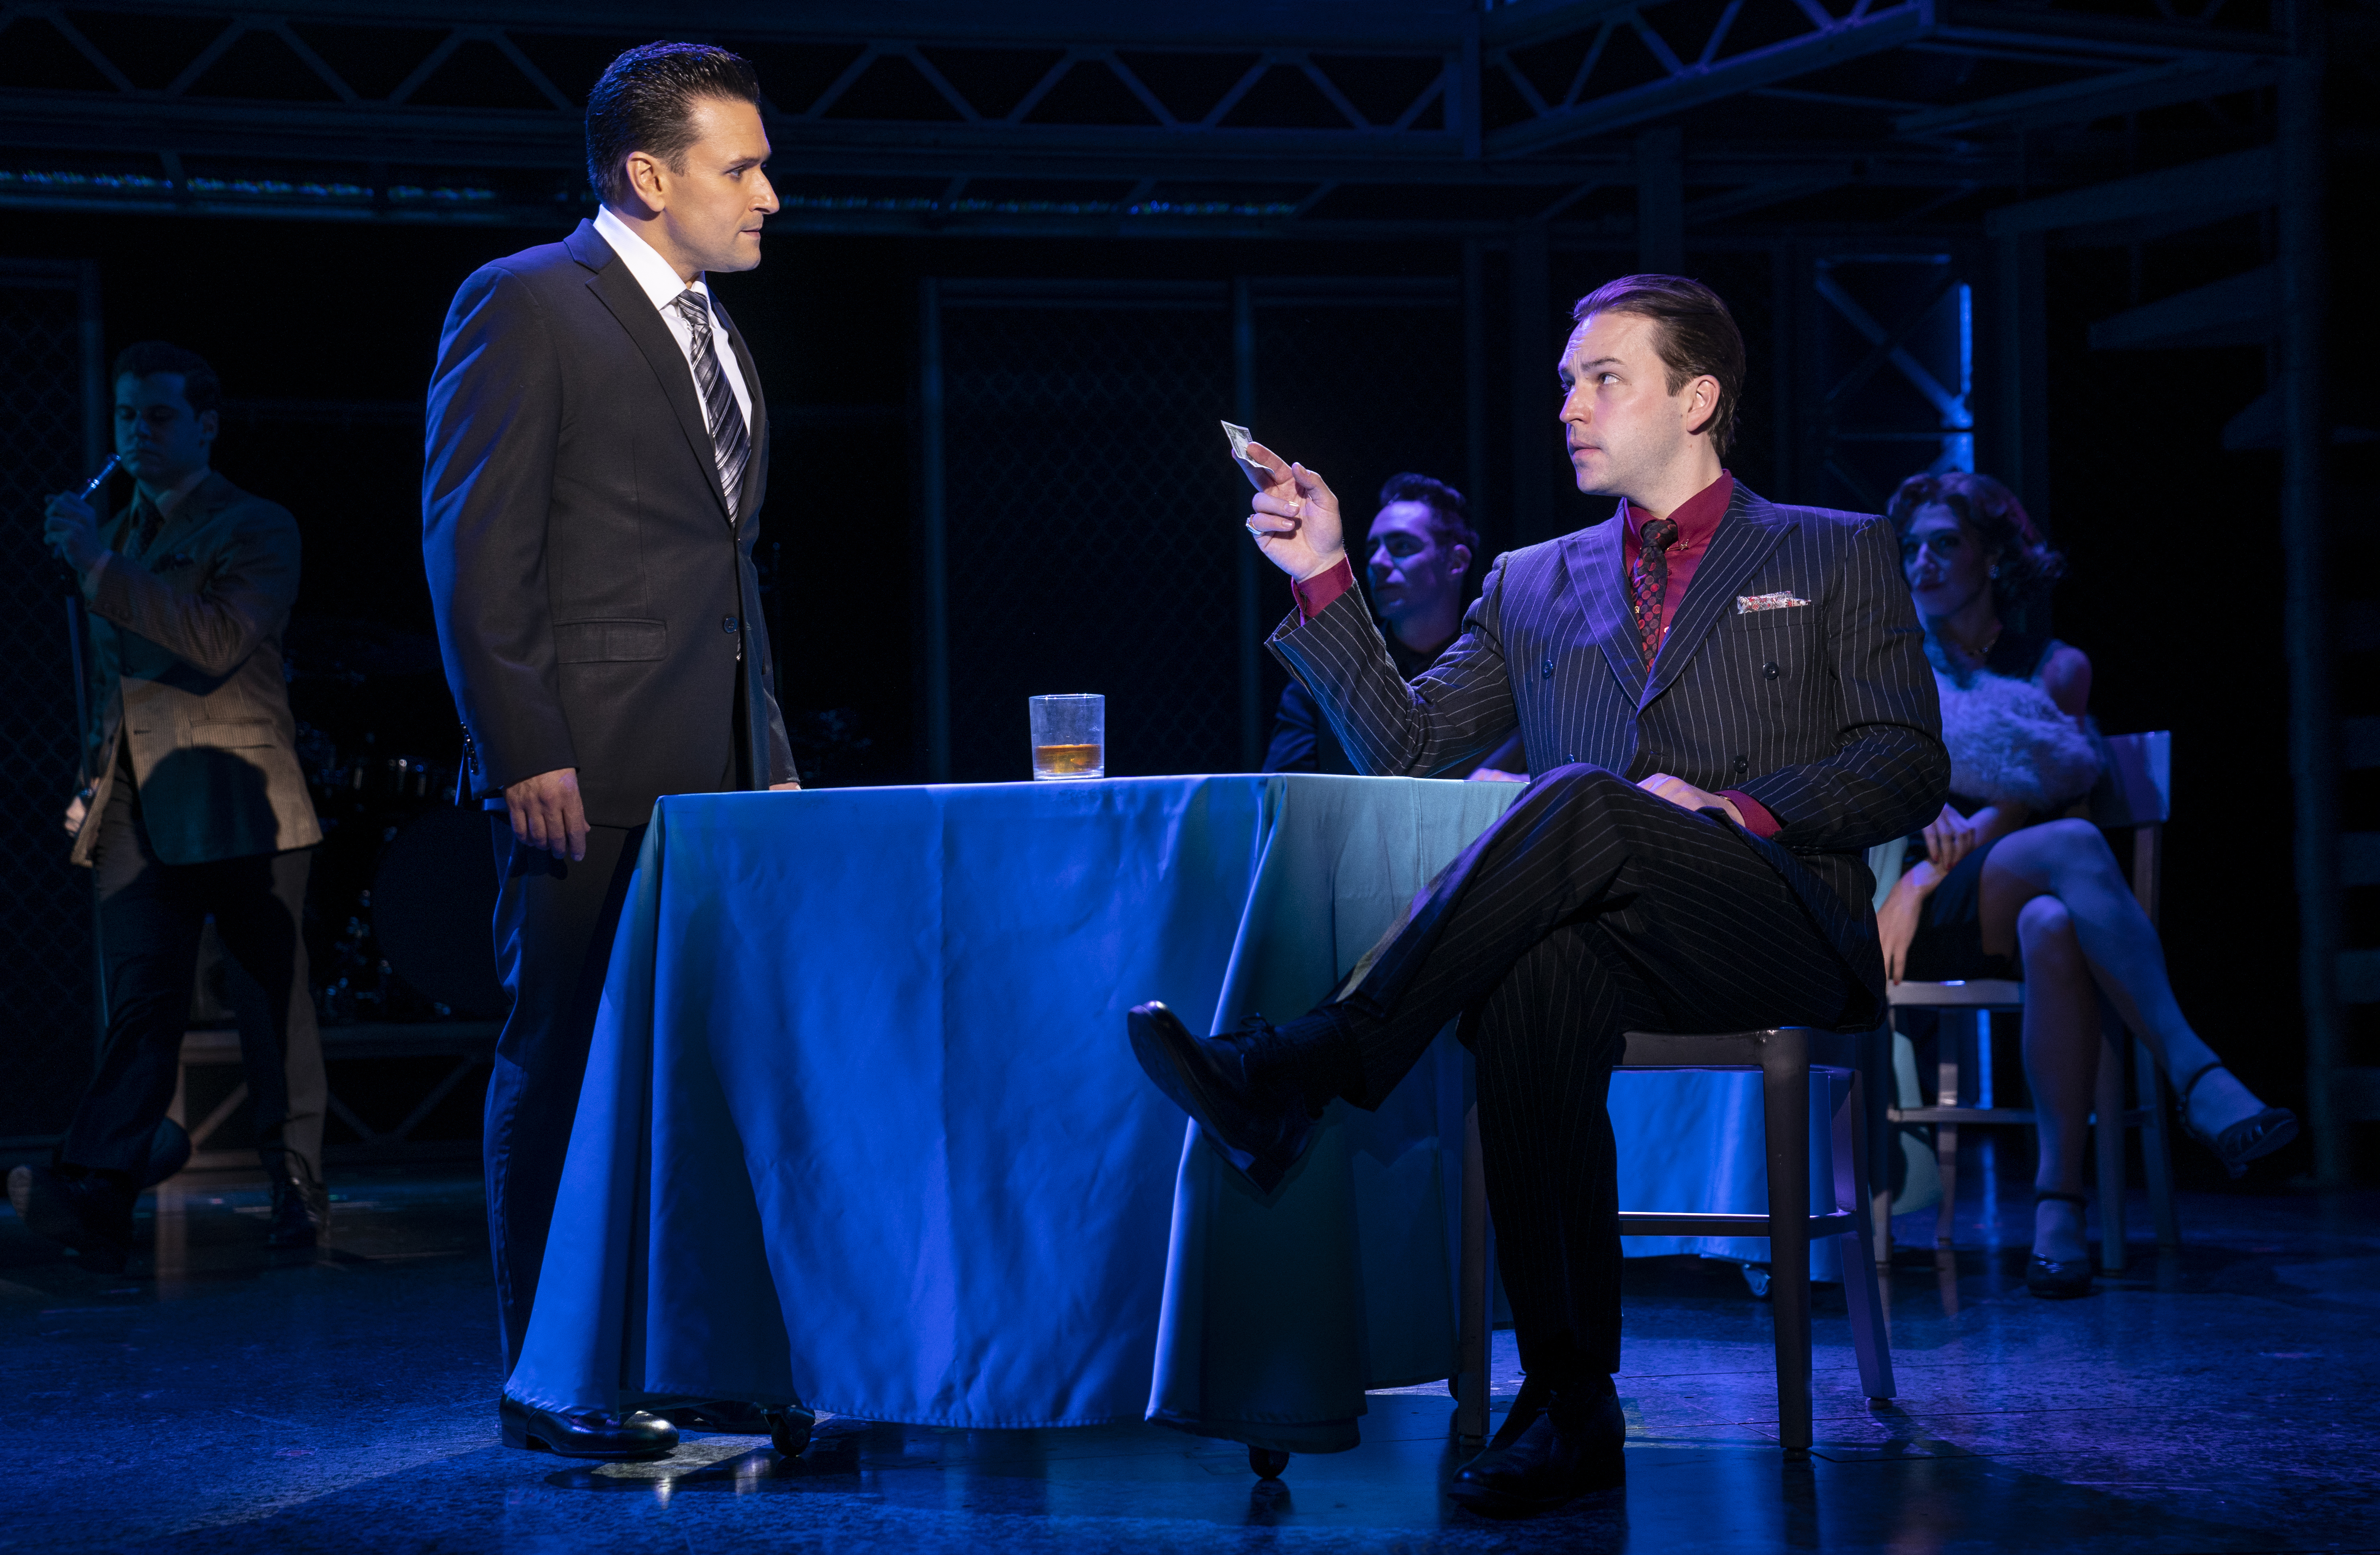 Jersey Boys: What to expect - 6